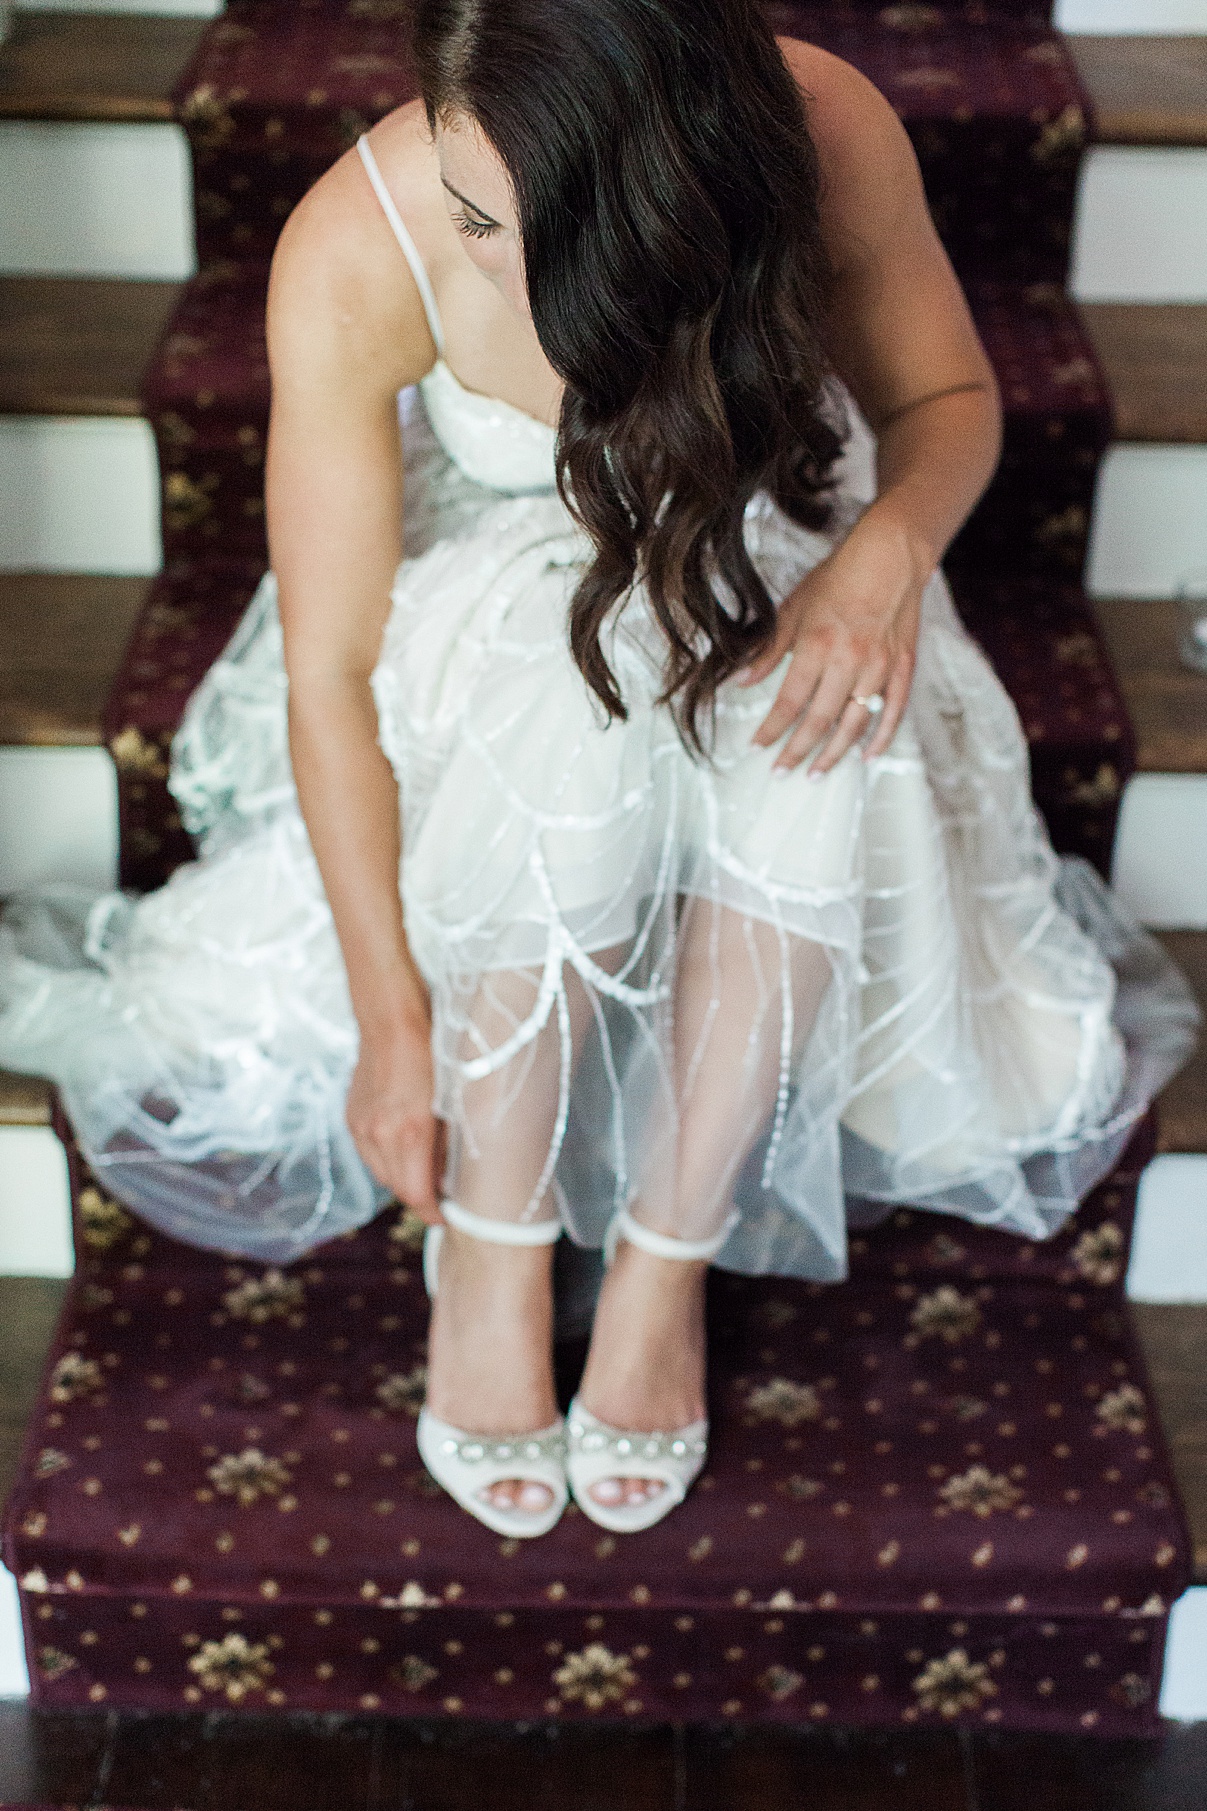 Bride on stairs strapping on wedding shoes | Balls Falls, Ontario Wedding| Ontario Wedding Photographer| Toronto Wedding Photographer| 3Photography|3photography.ca